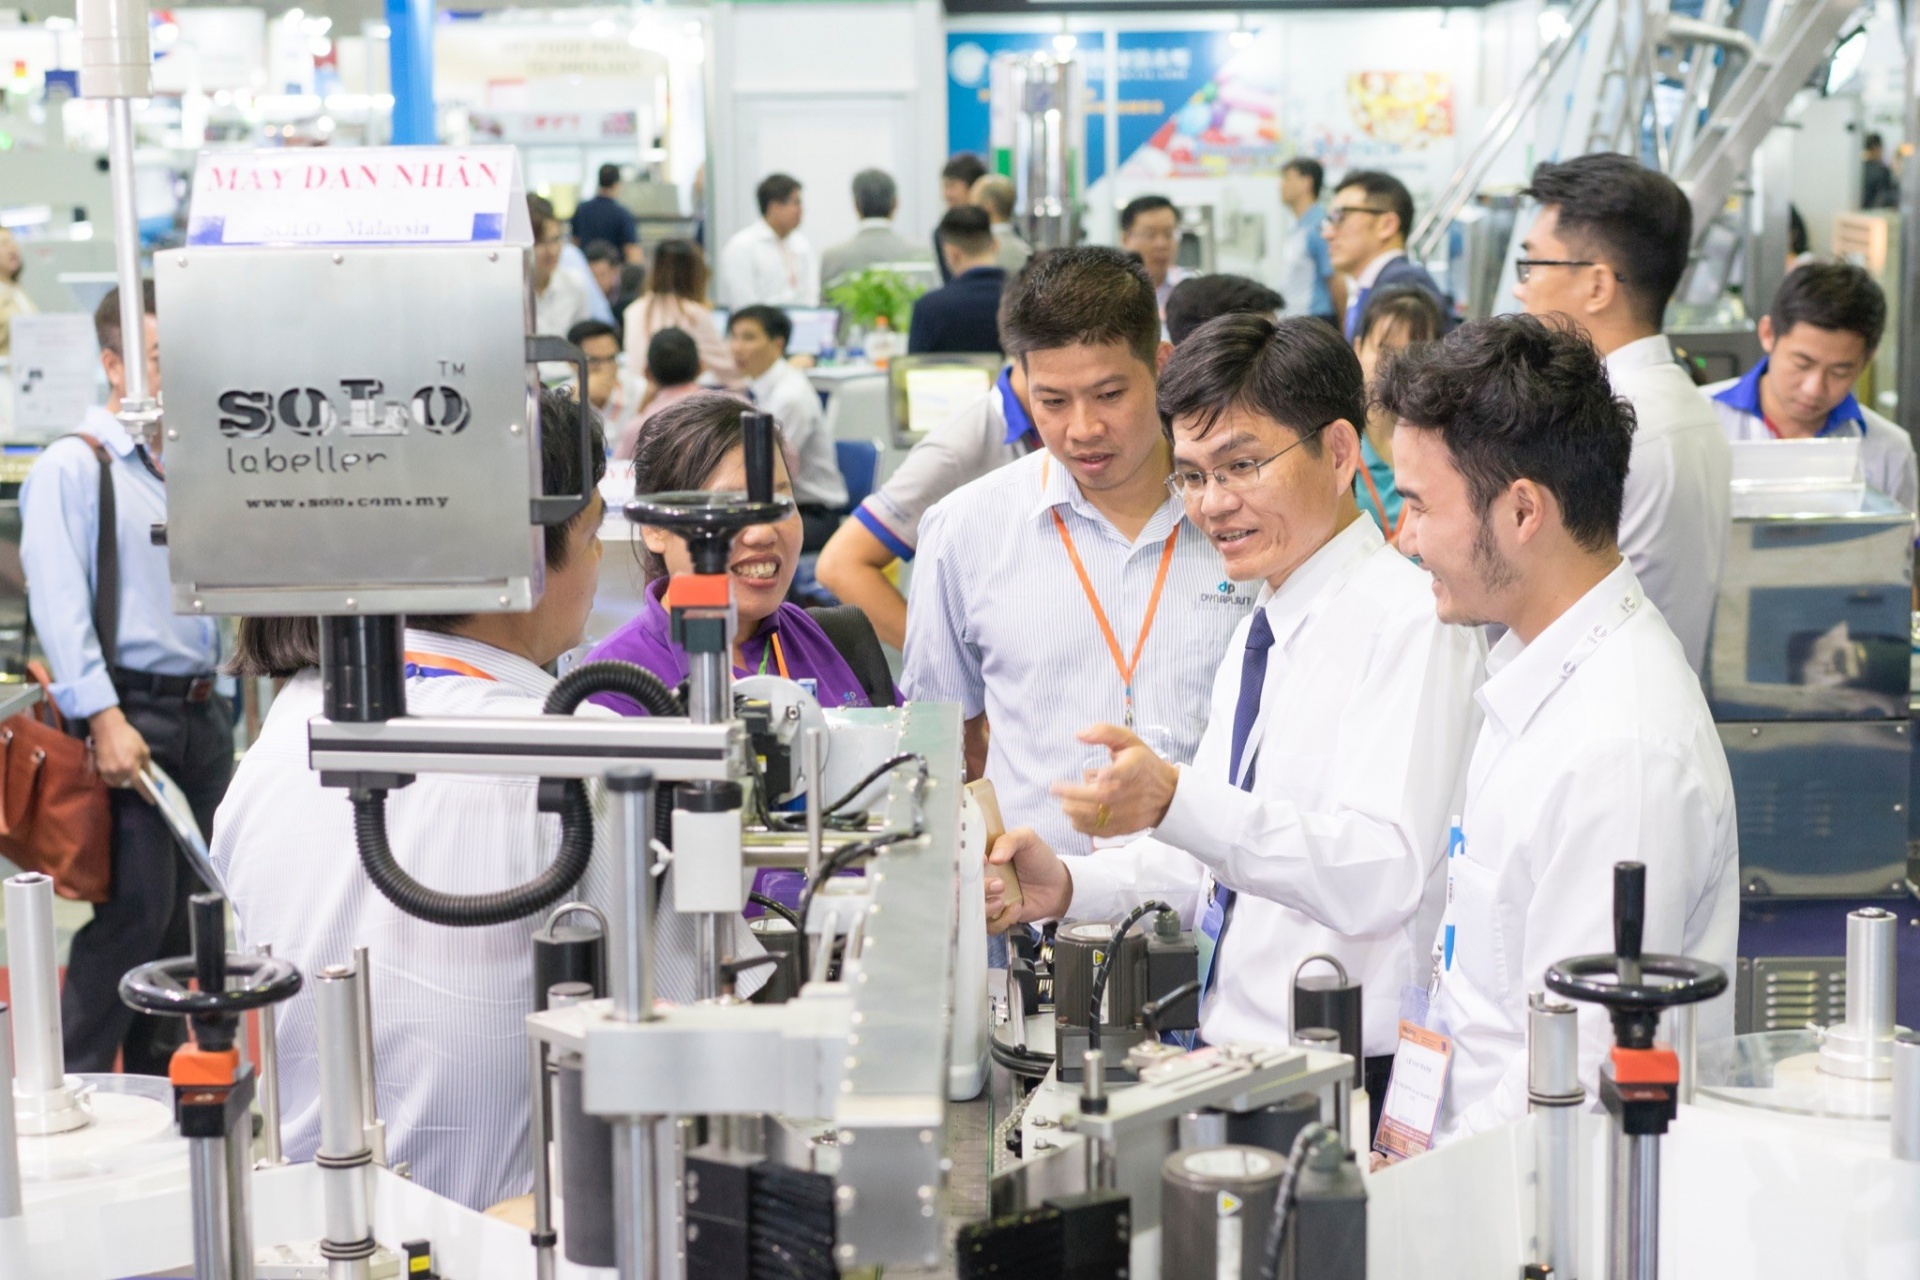 ProPak Vietnam 2022-a dedicated business platform in the processing and packaging technology industry